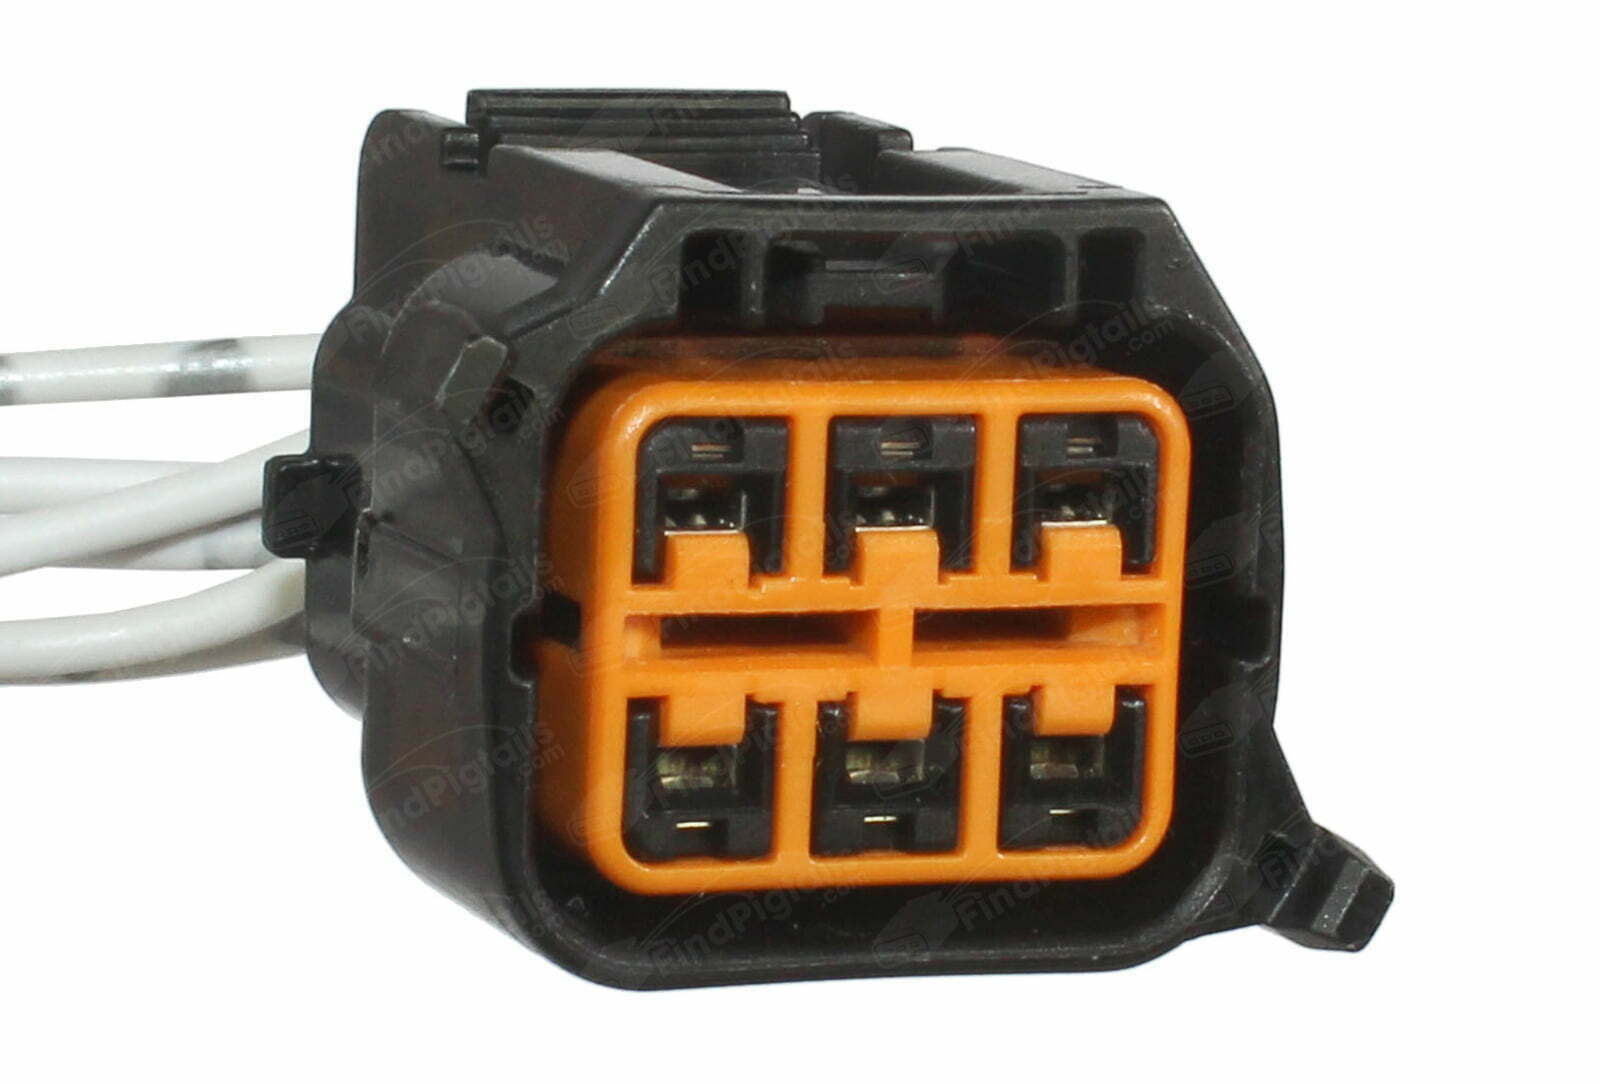 E71A6 is a 6-pin automotive connector which serves at least 25 functions for 1+ vehicles.